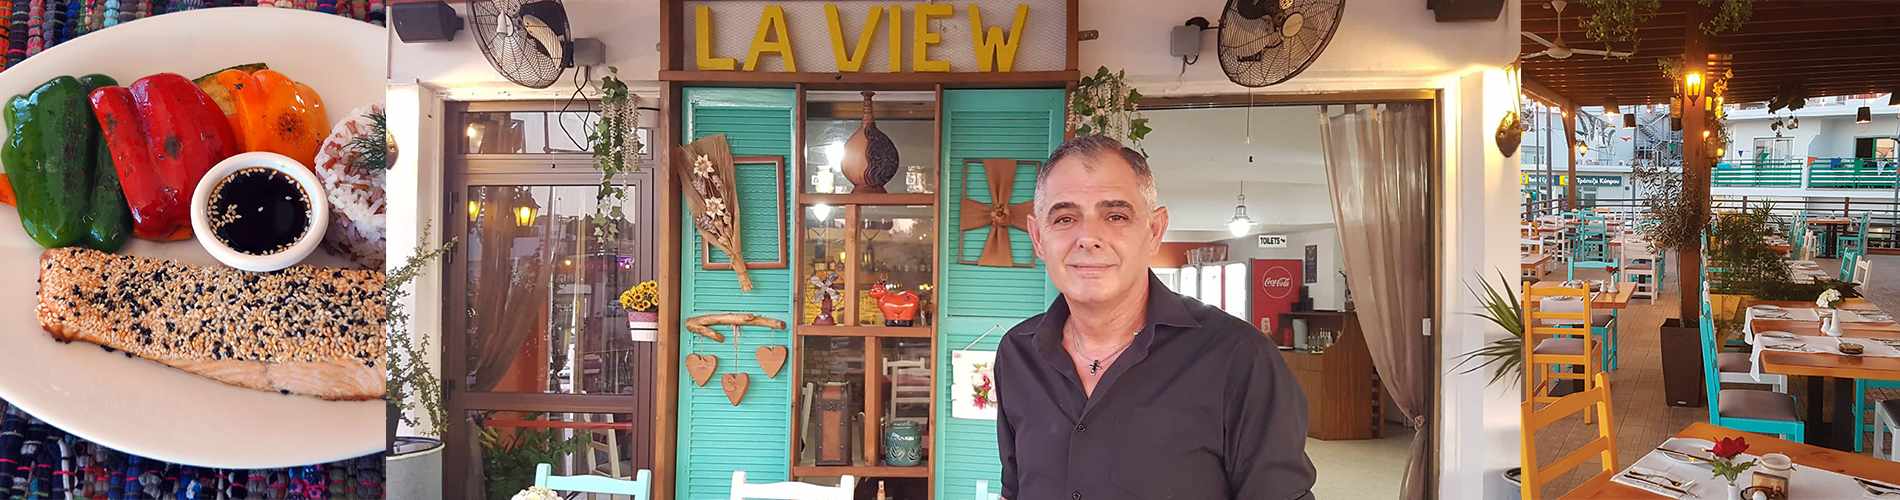 Interview with the owner of La VIEW Fusion Restaurant in Ayia Napa